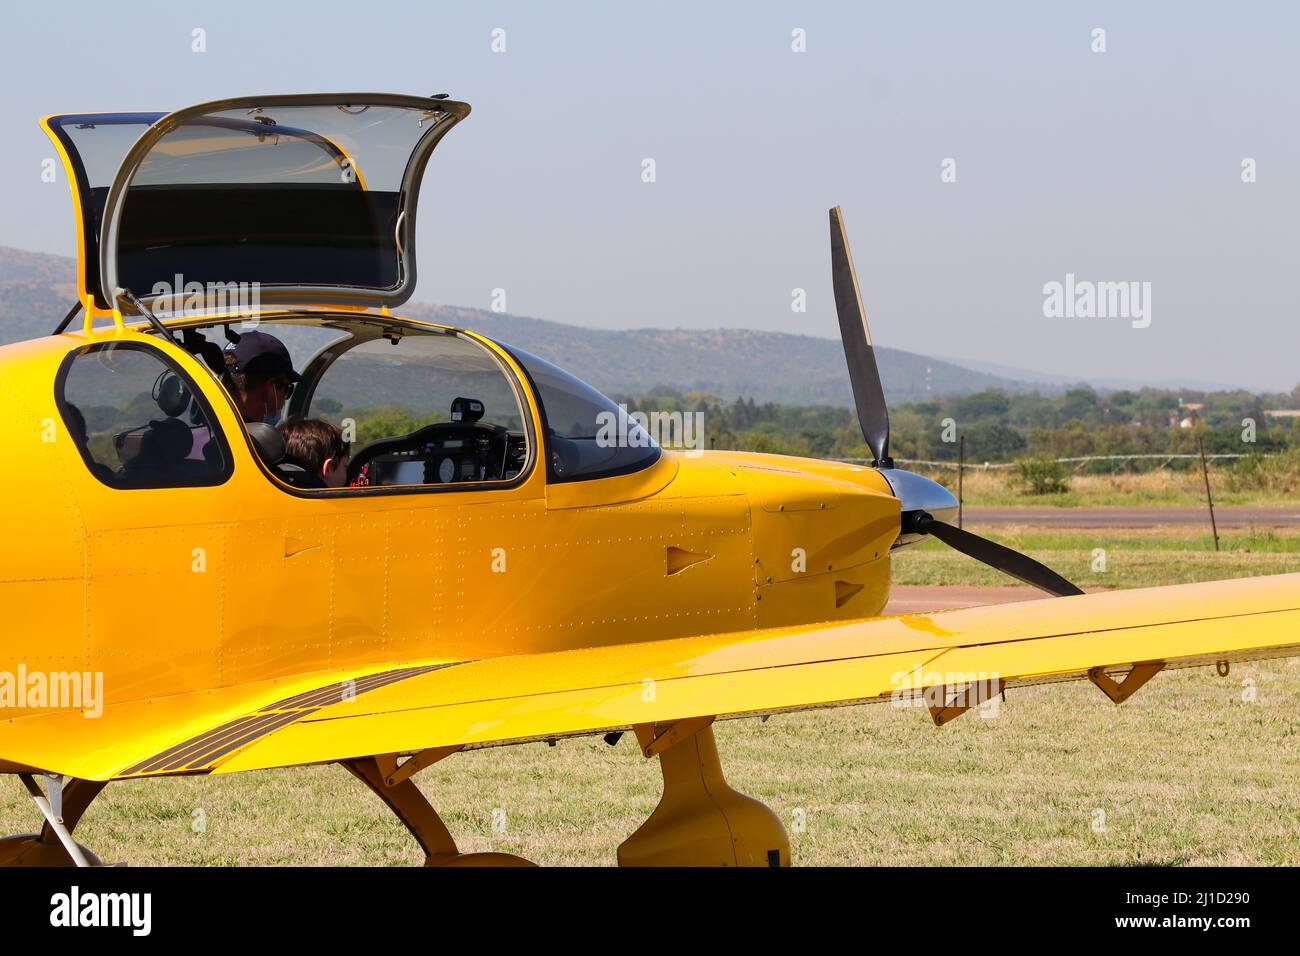 Light Acrobatic Airplane With Occupants Before Flight Stock Photo